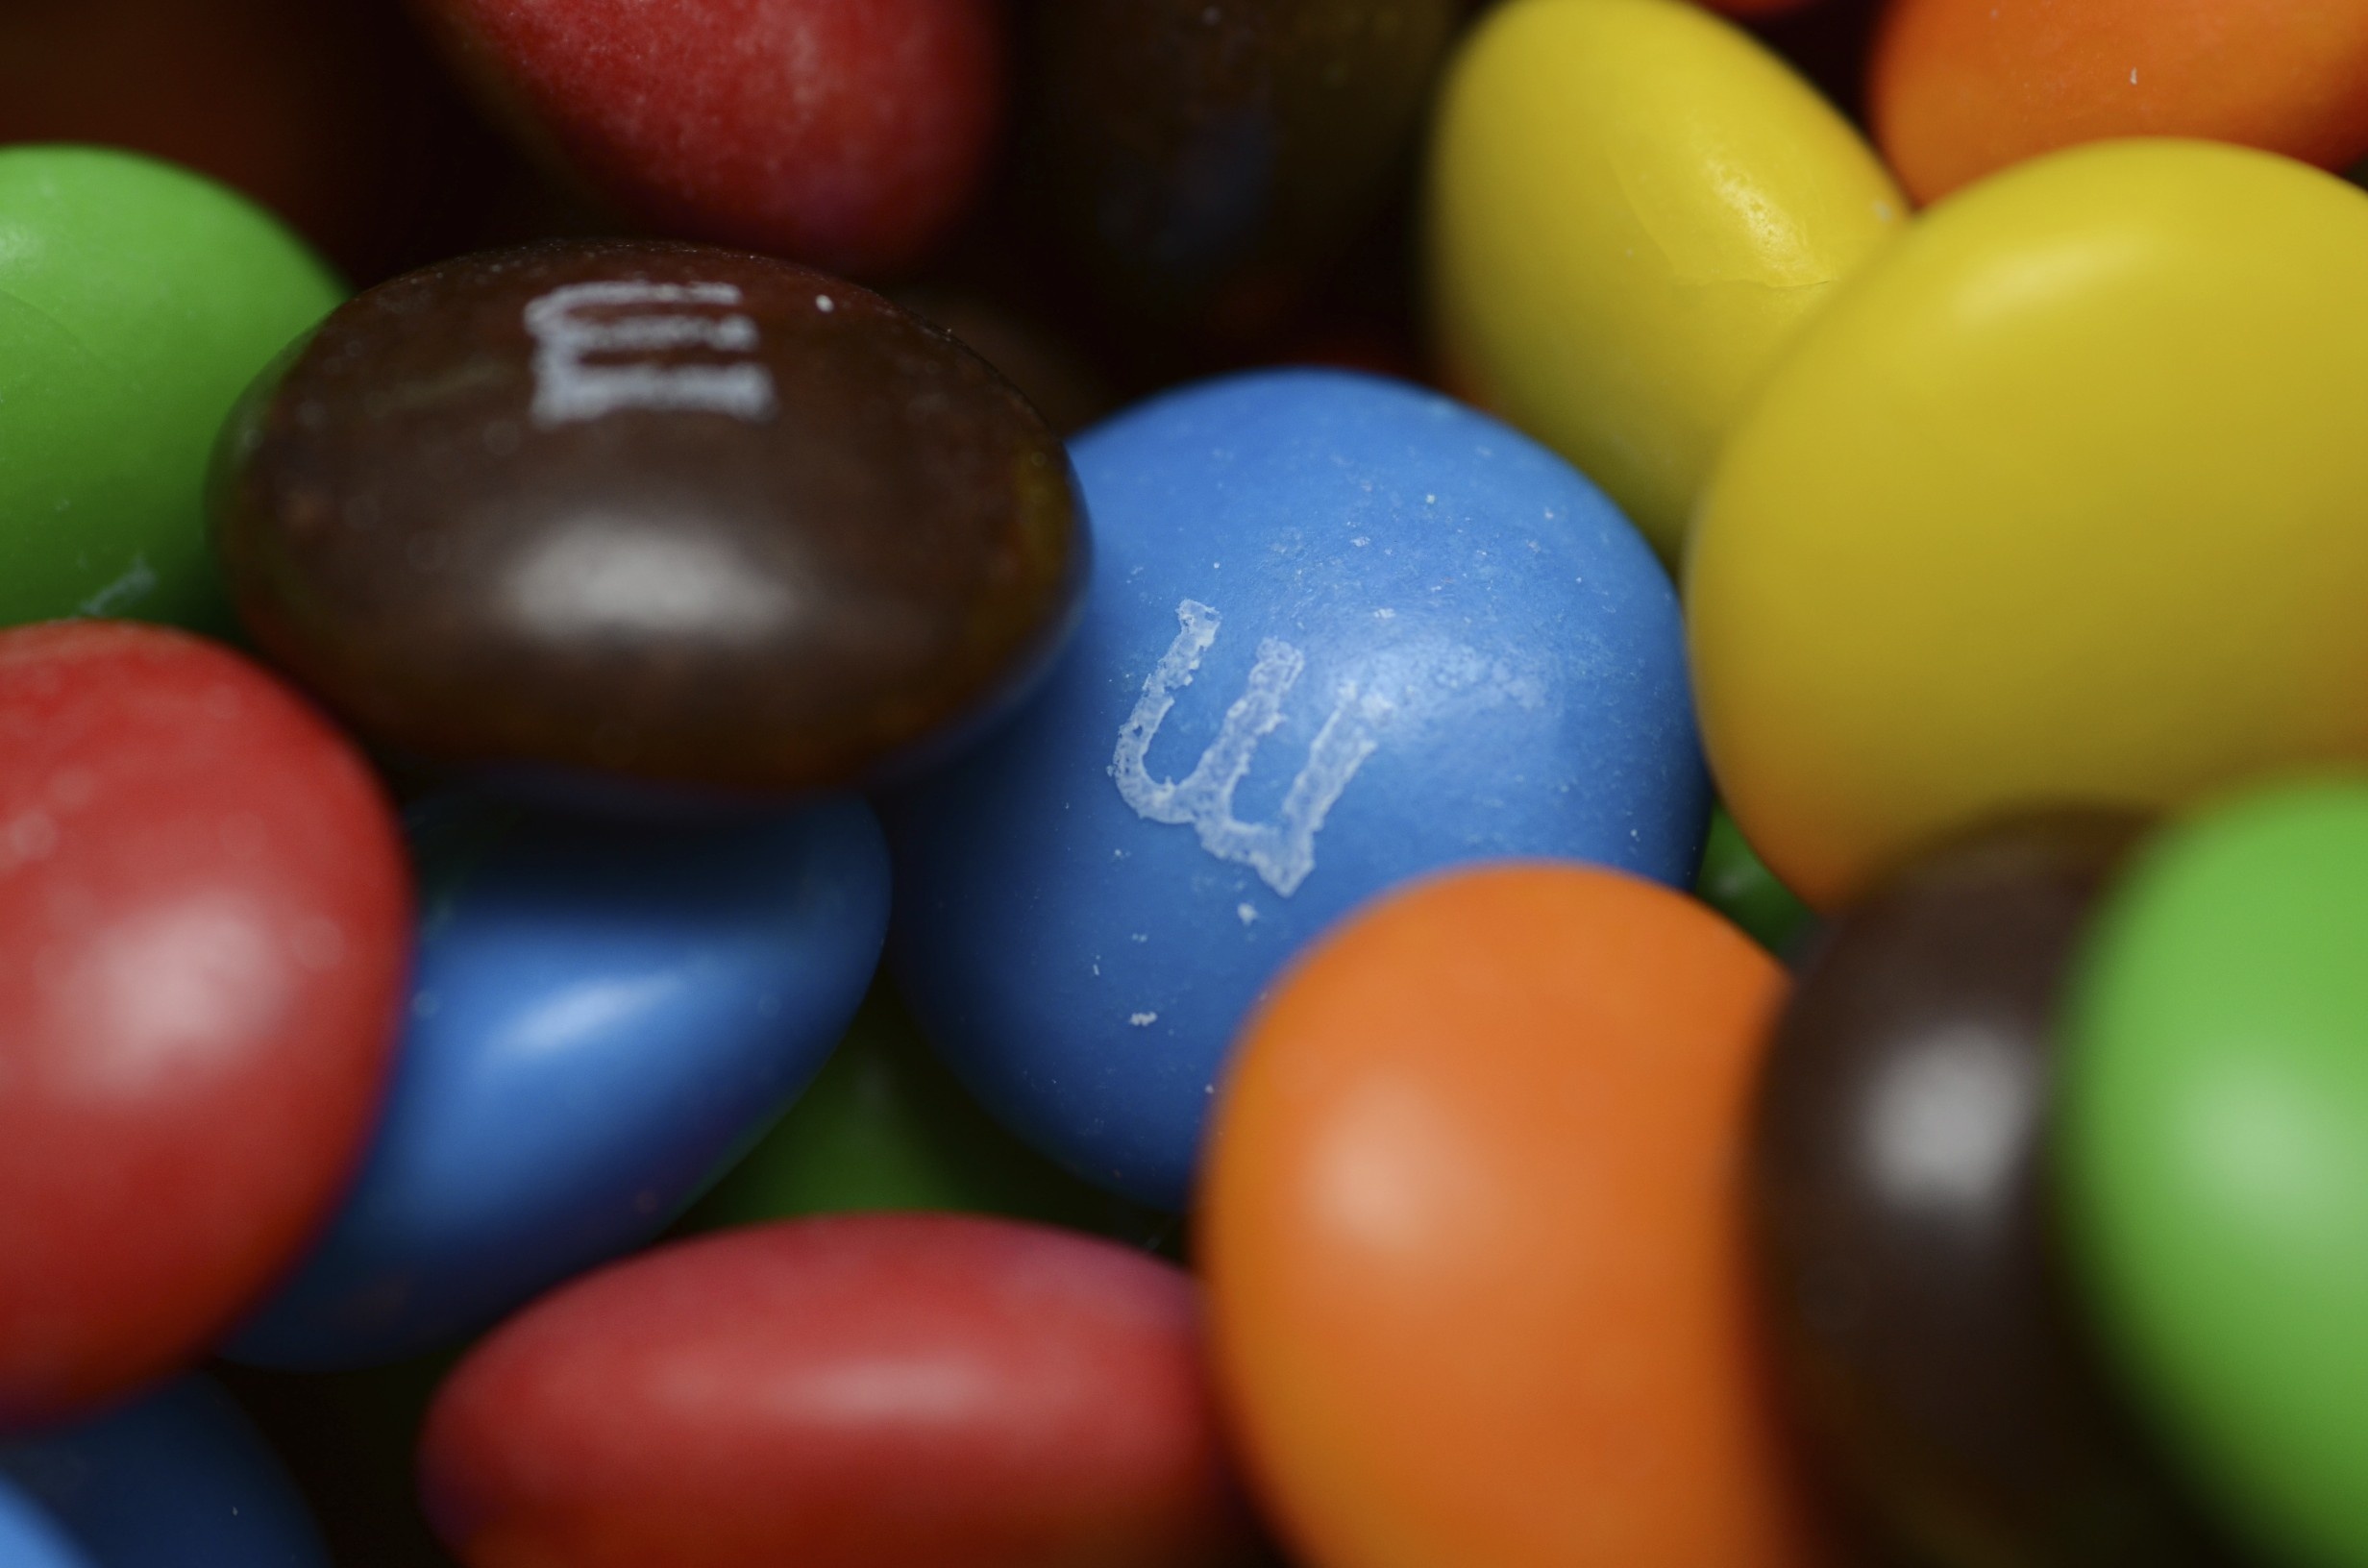 M&M's wallpapers, Colorful backgrounds, Eye-catching designs, Sugar-coated fun, 2470x1640 HD Desktop